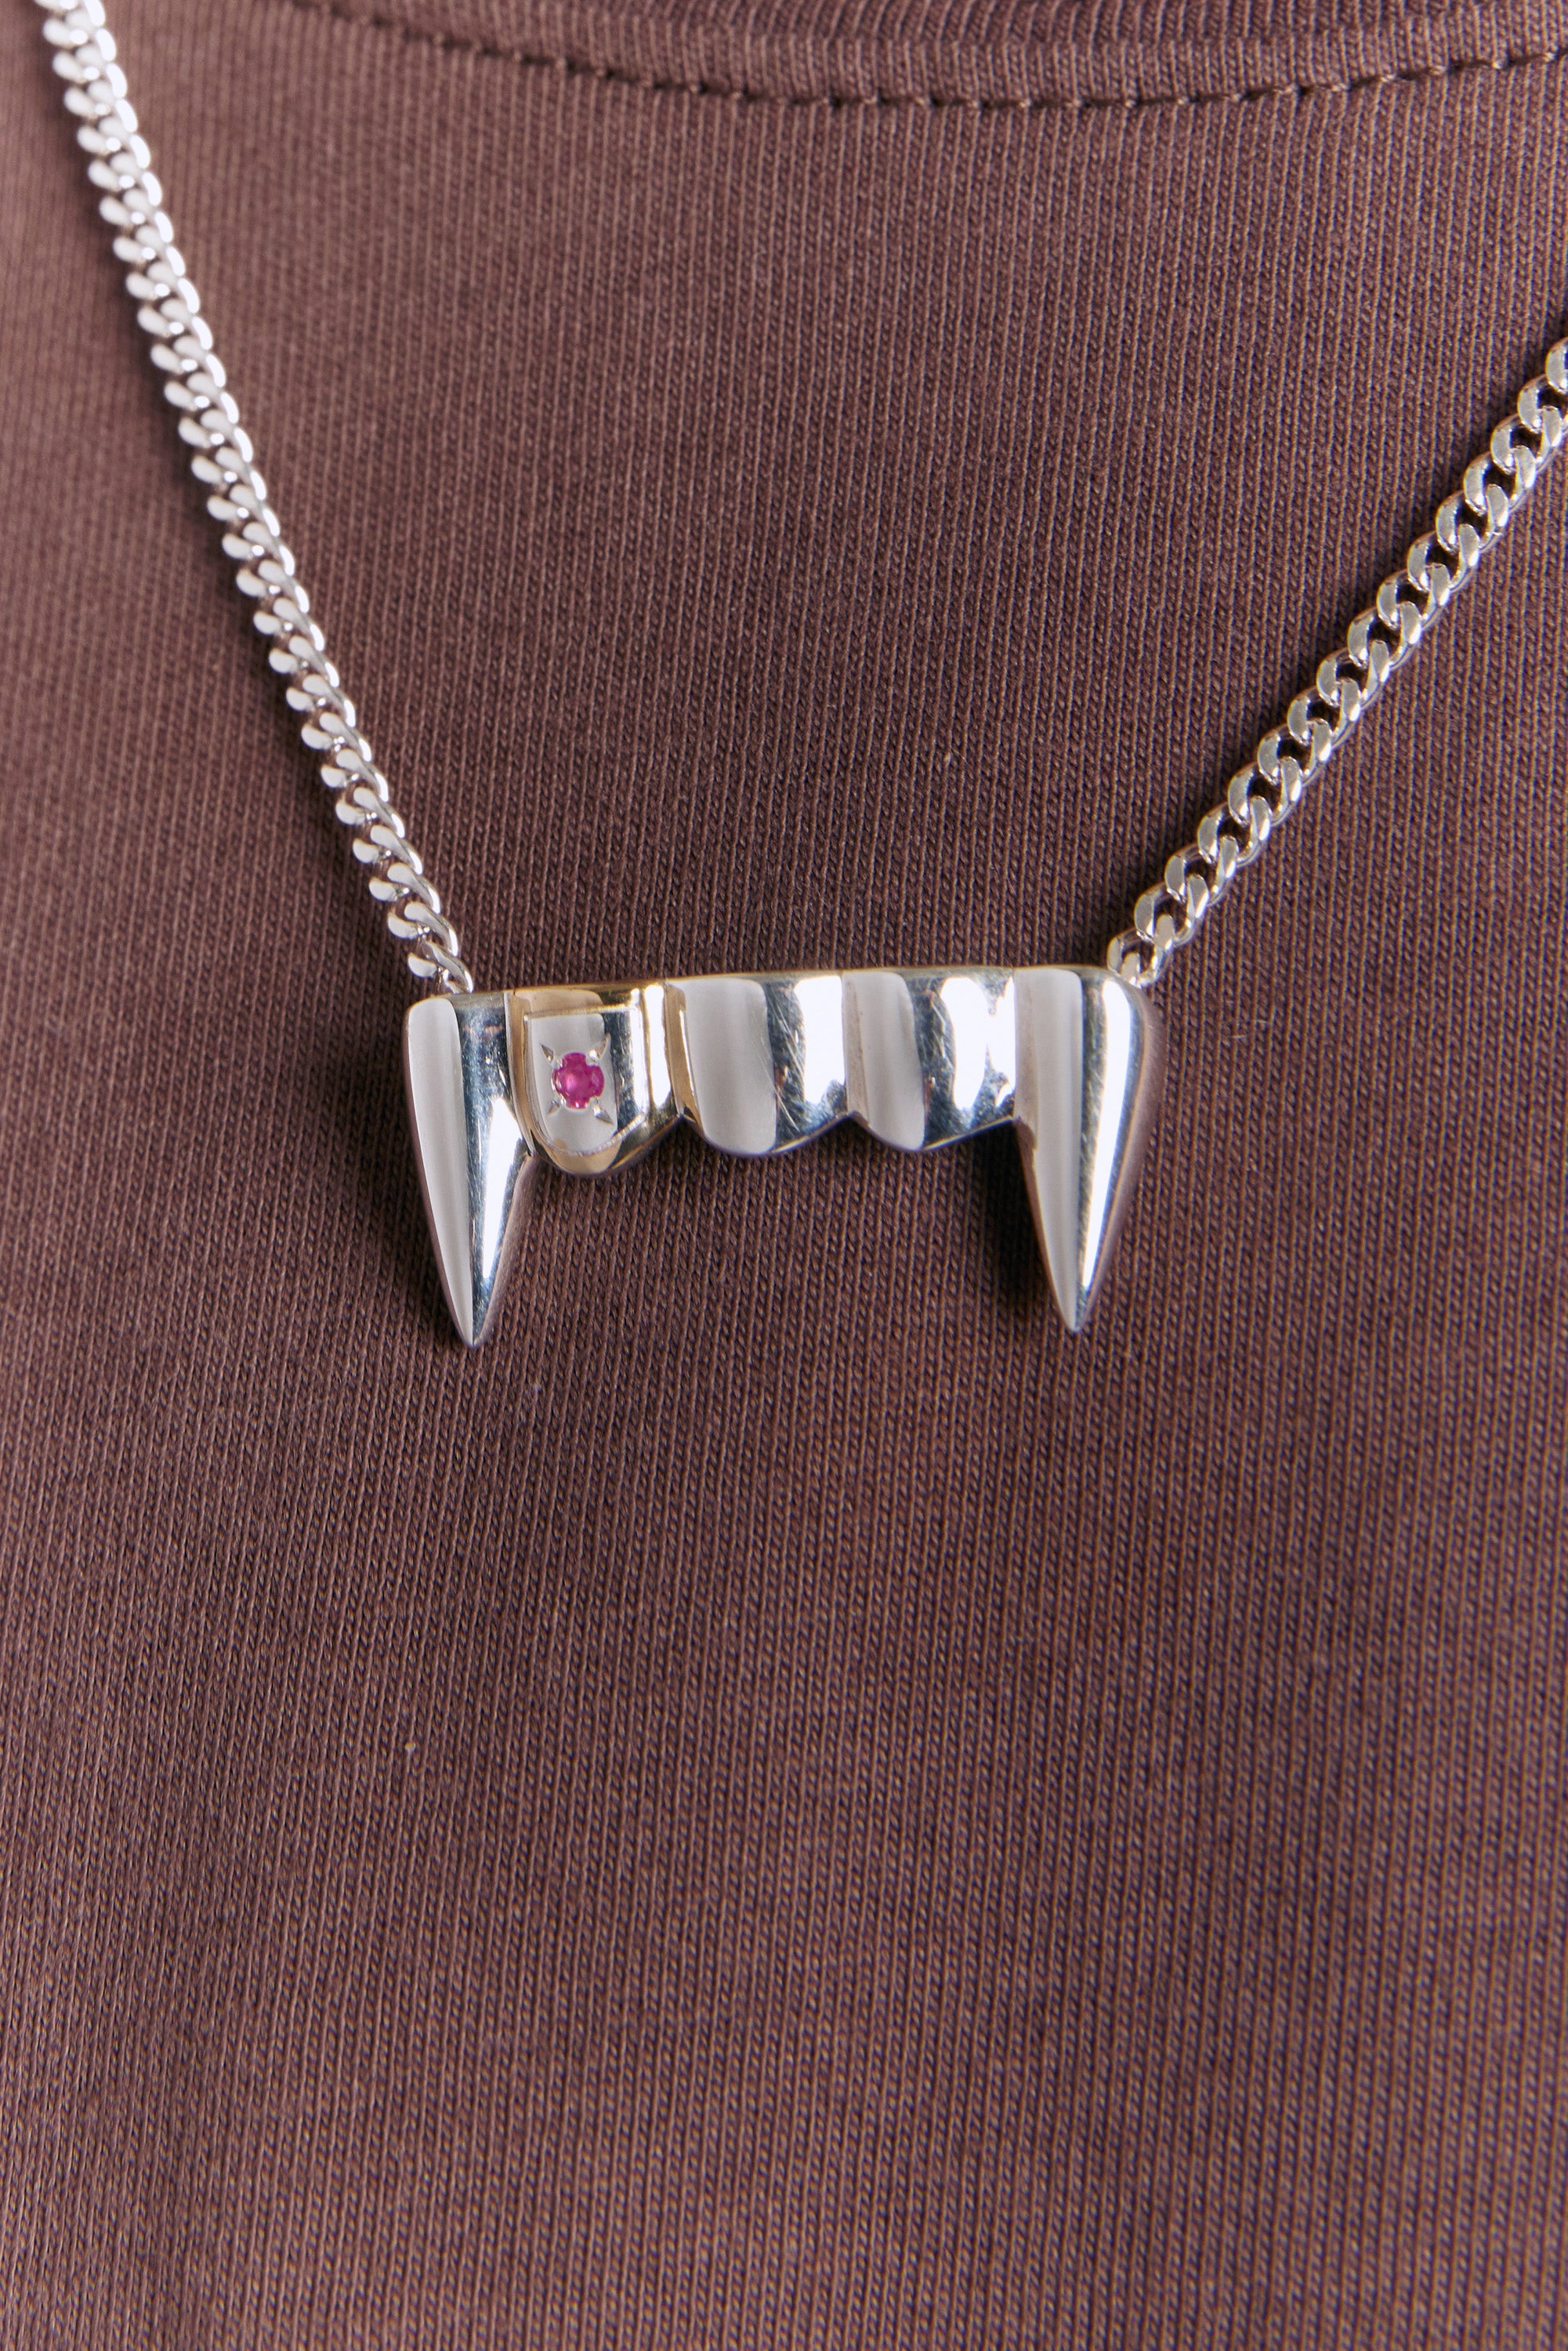 The SINGLE RUBY FANGZ NECKLACE  available online with global shipping, and in PAM Stores Melbourne and Sydney.